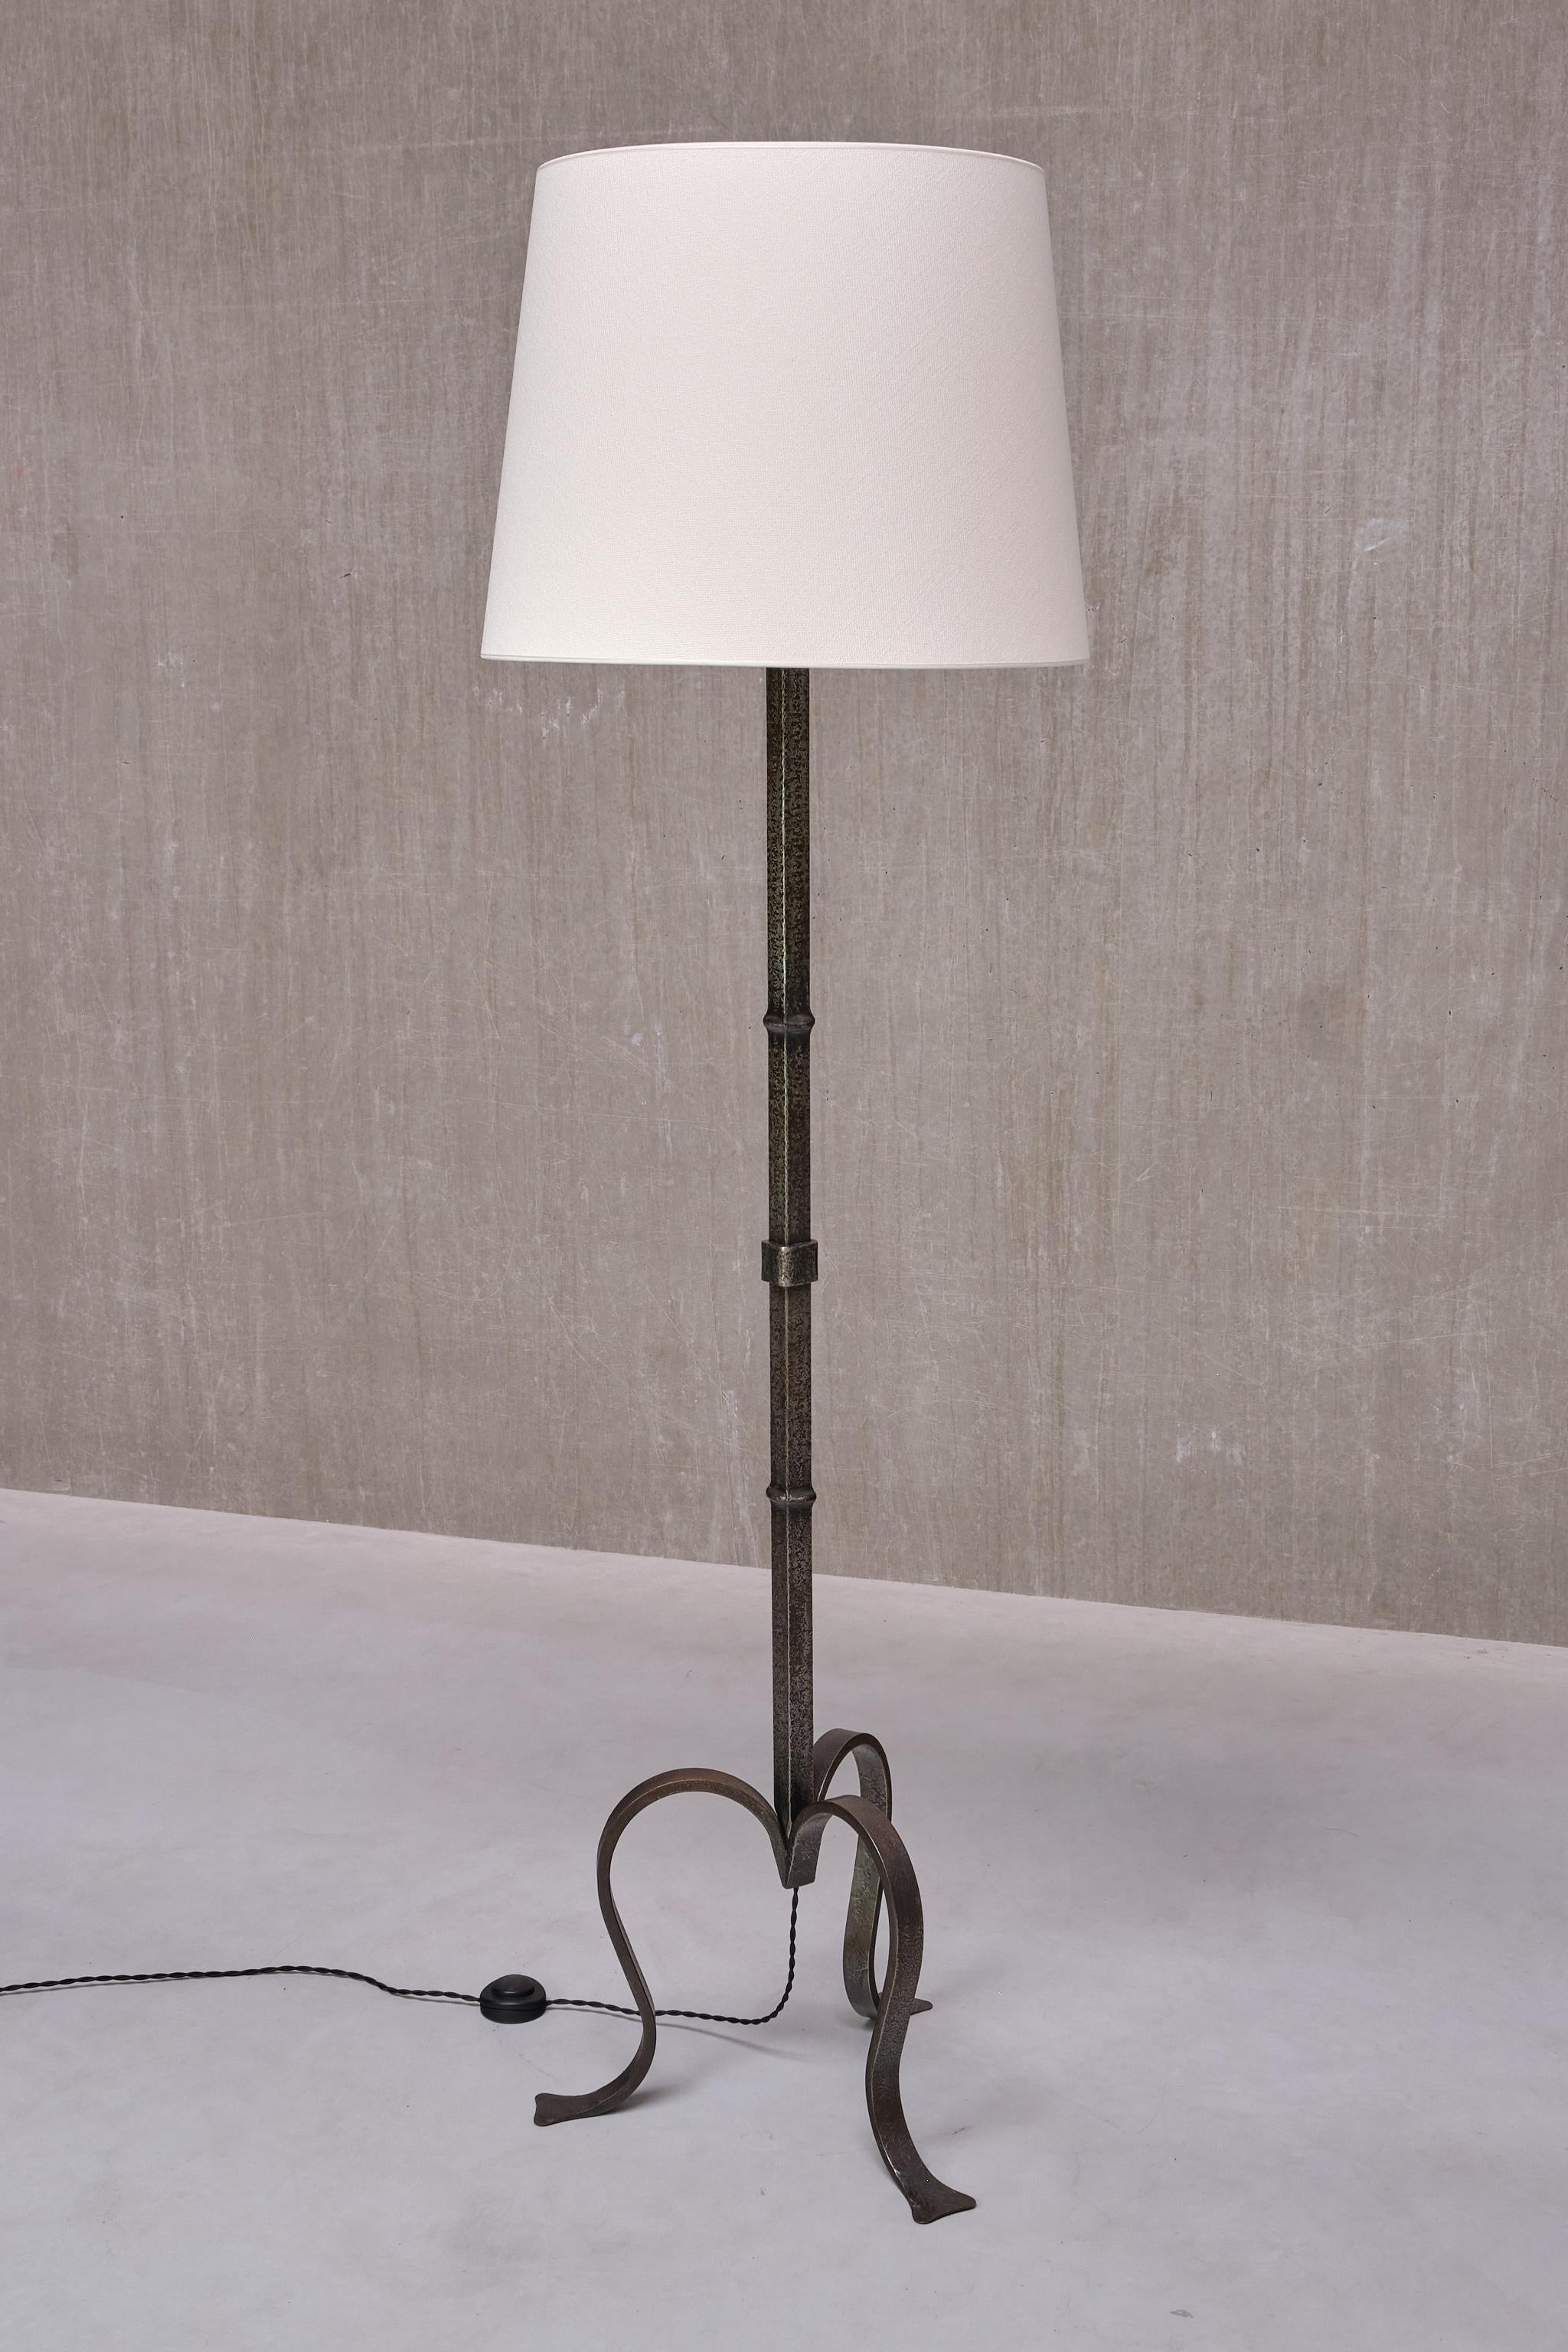 This rare three-legged floor lamp was manufactured in France in the early 1950s. 

The striking base is marked by the three sculptural, curved legs ending in striking flat feet. The entire lamp was produced by hand in a natural wrought iron which